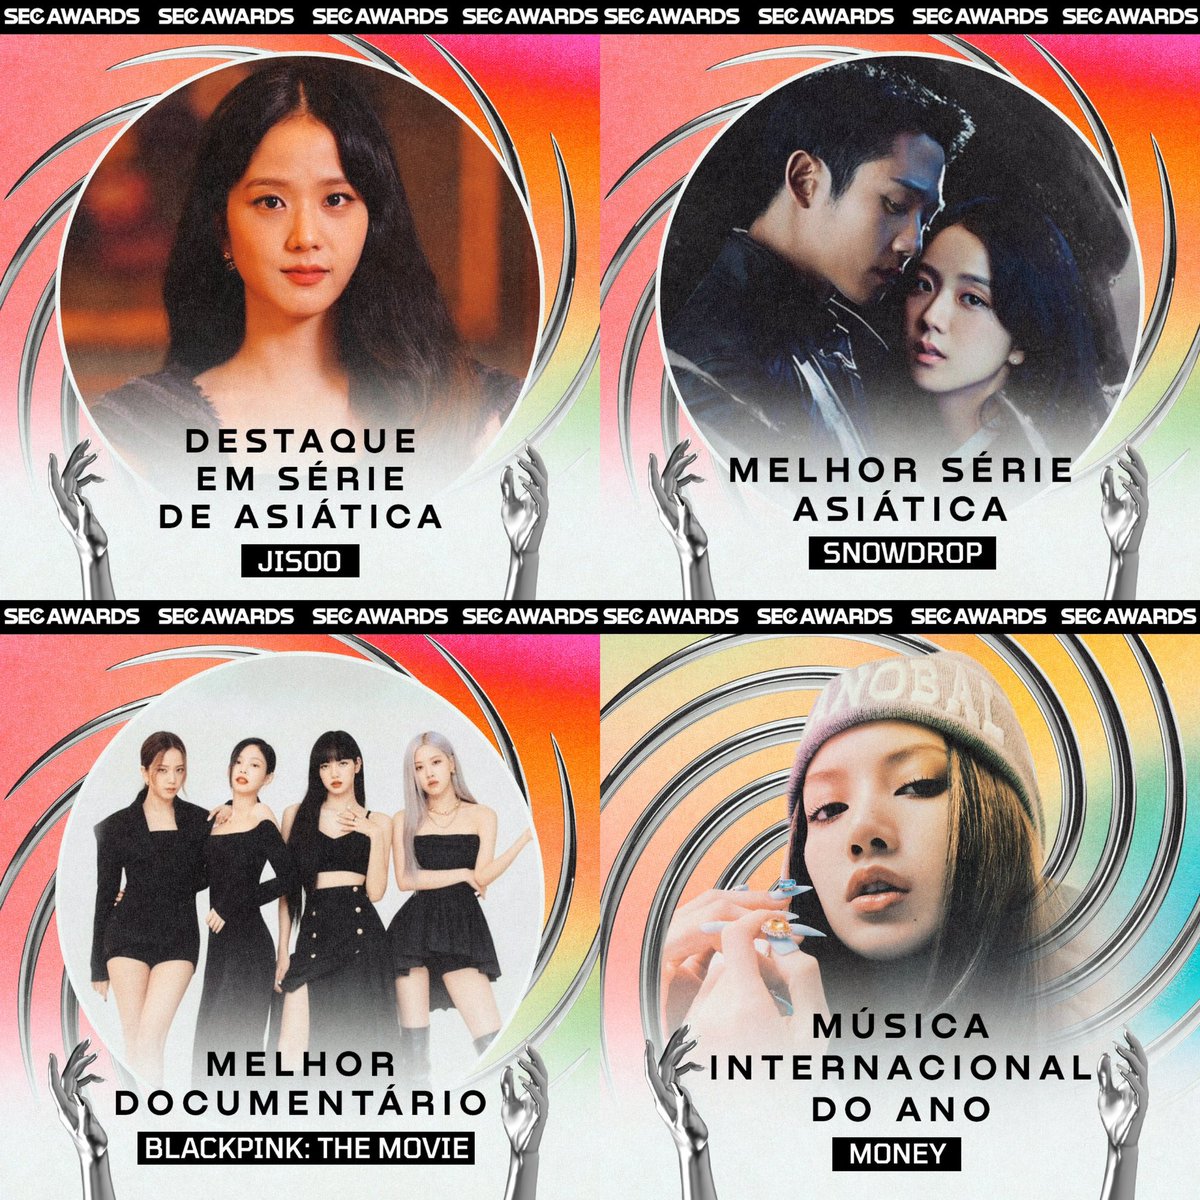 Congratulations @BLACKPINK for Winning this year’s #SECAwards:

• Featured in Asian Series (Jisoo)
• International Music (Money)
• Best Asian Series (Snowdrop)
• Best Documentary (Blackpink: The Movie)

#SECAwardsDay @secawards 
@seriesemcena @ygofficialblink